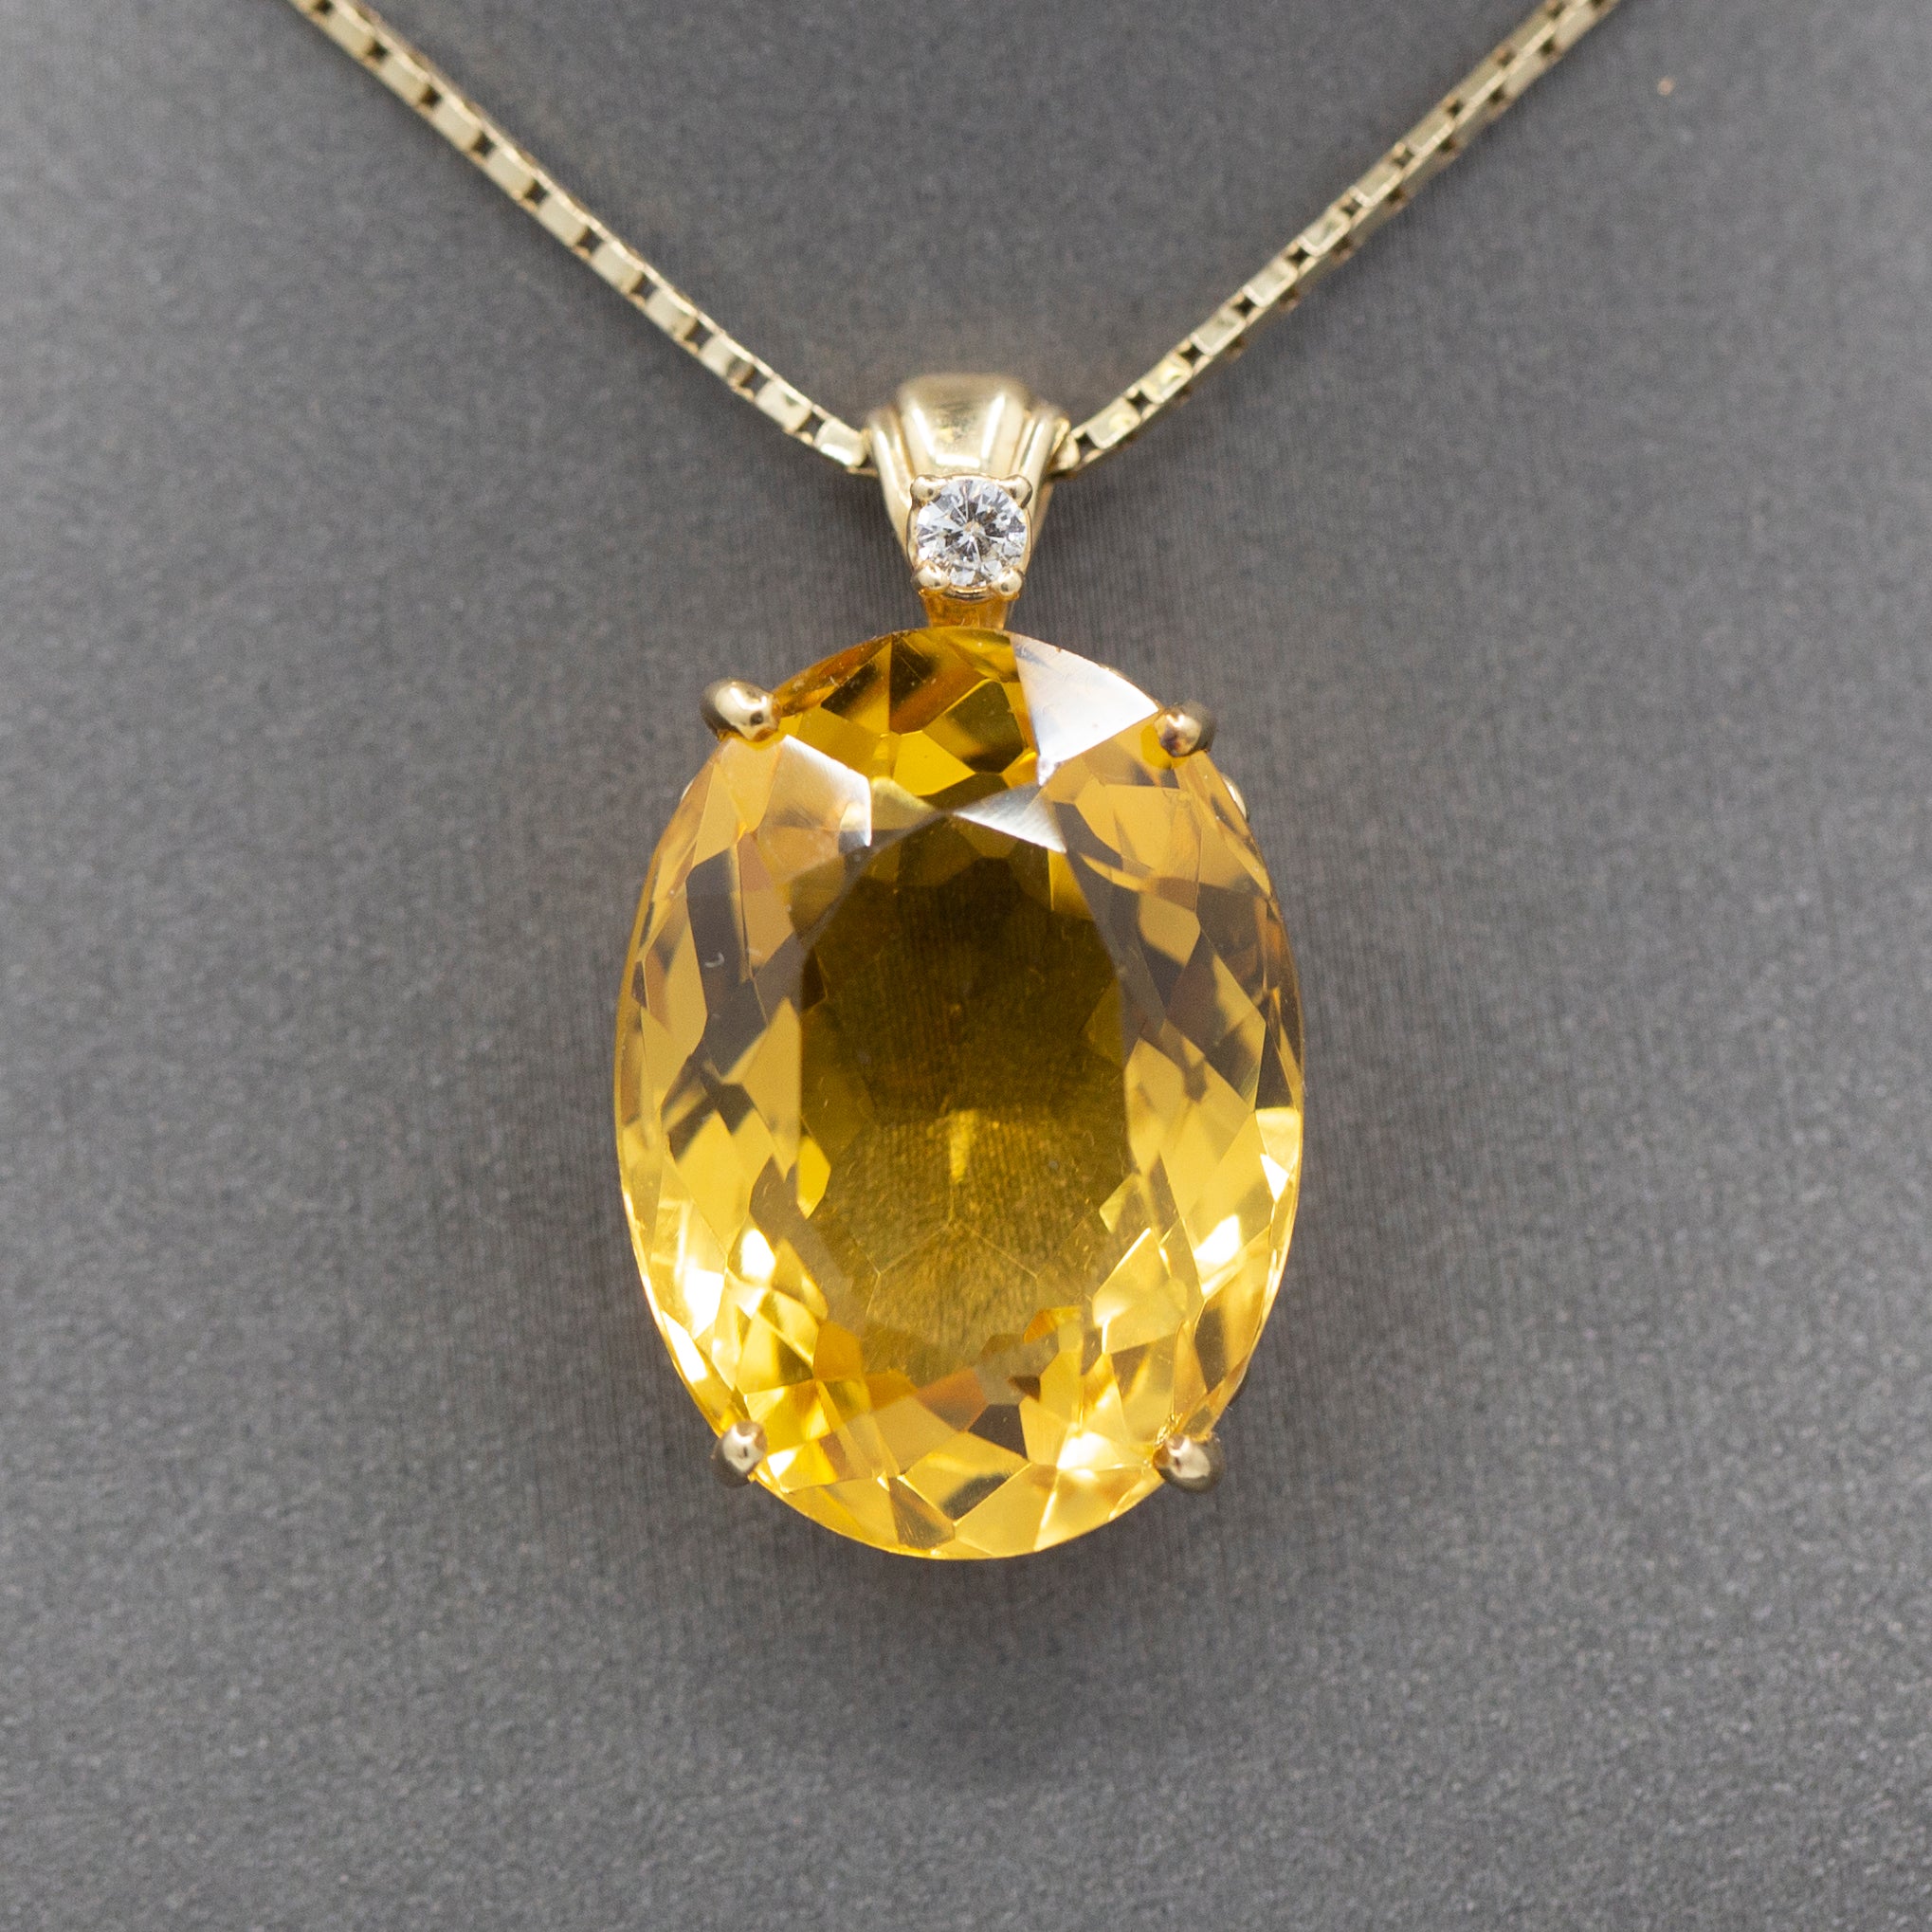 Sunny Citrine and Diamond Accent Pendant Necklace in 14k Yellow Gold